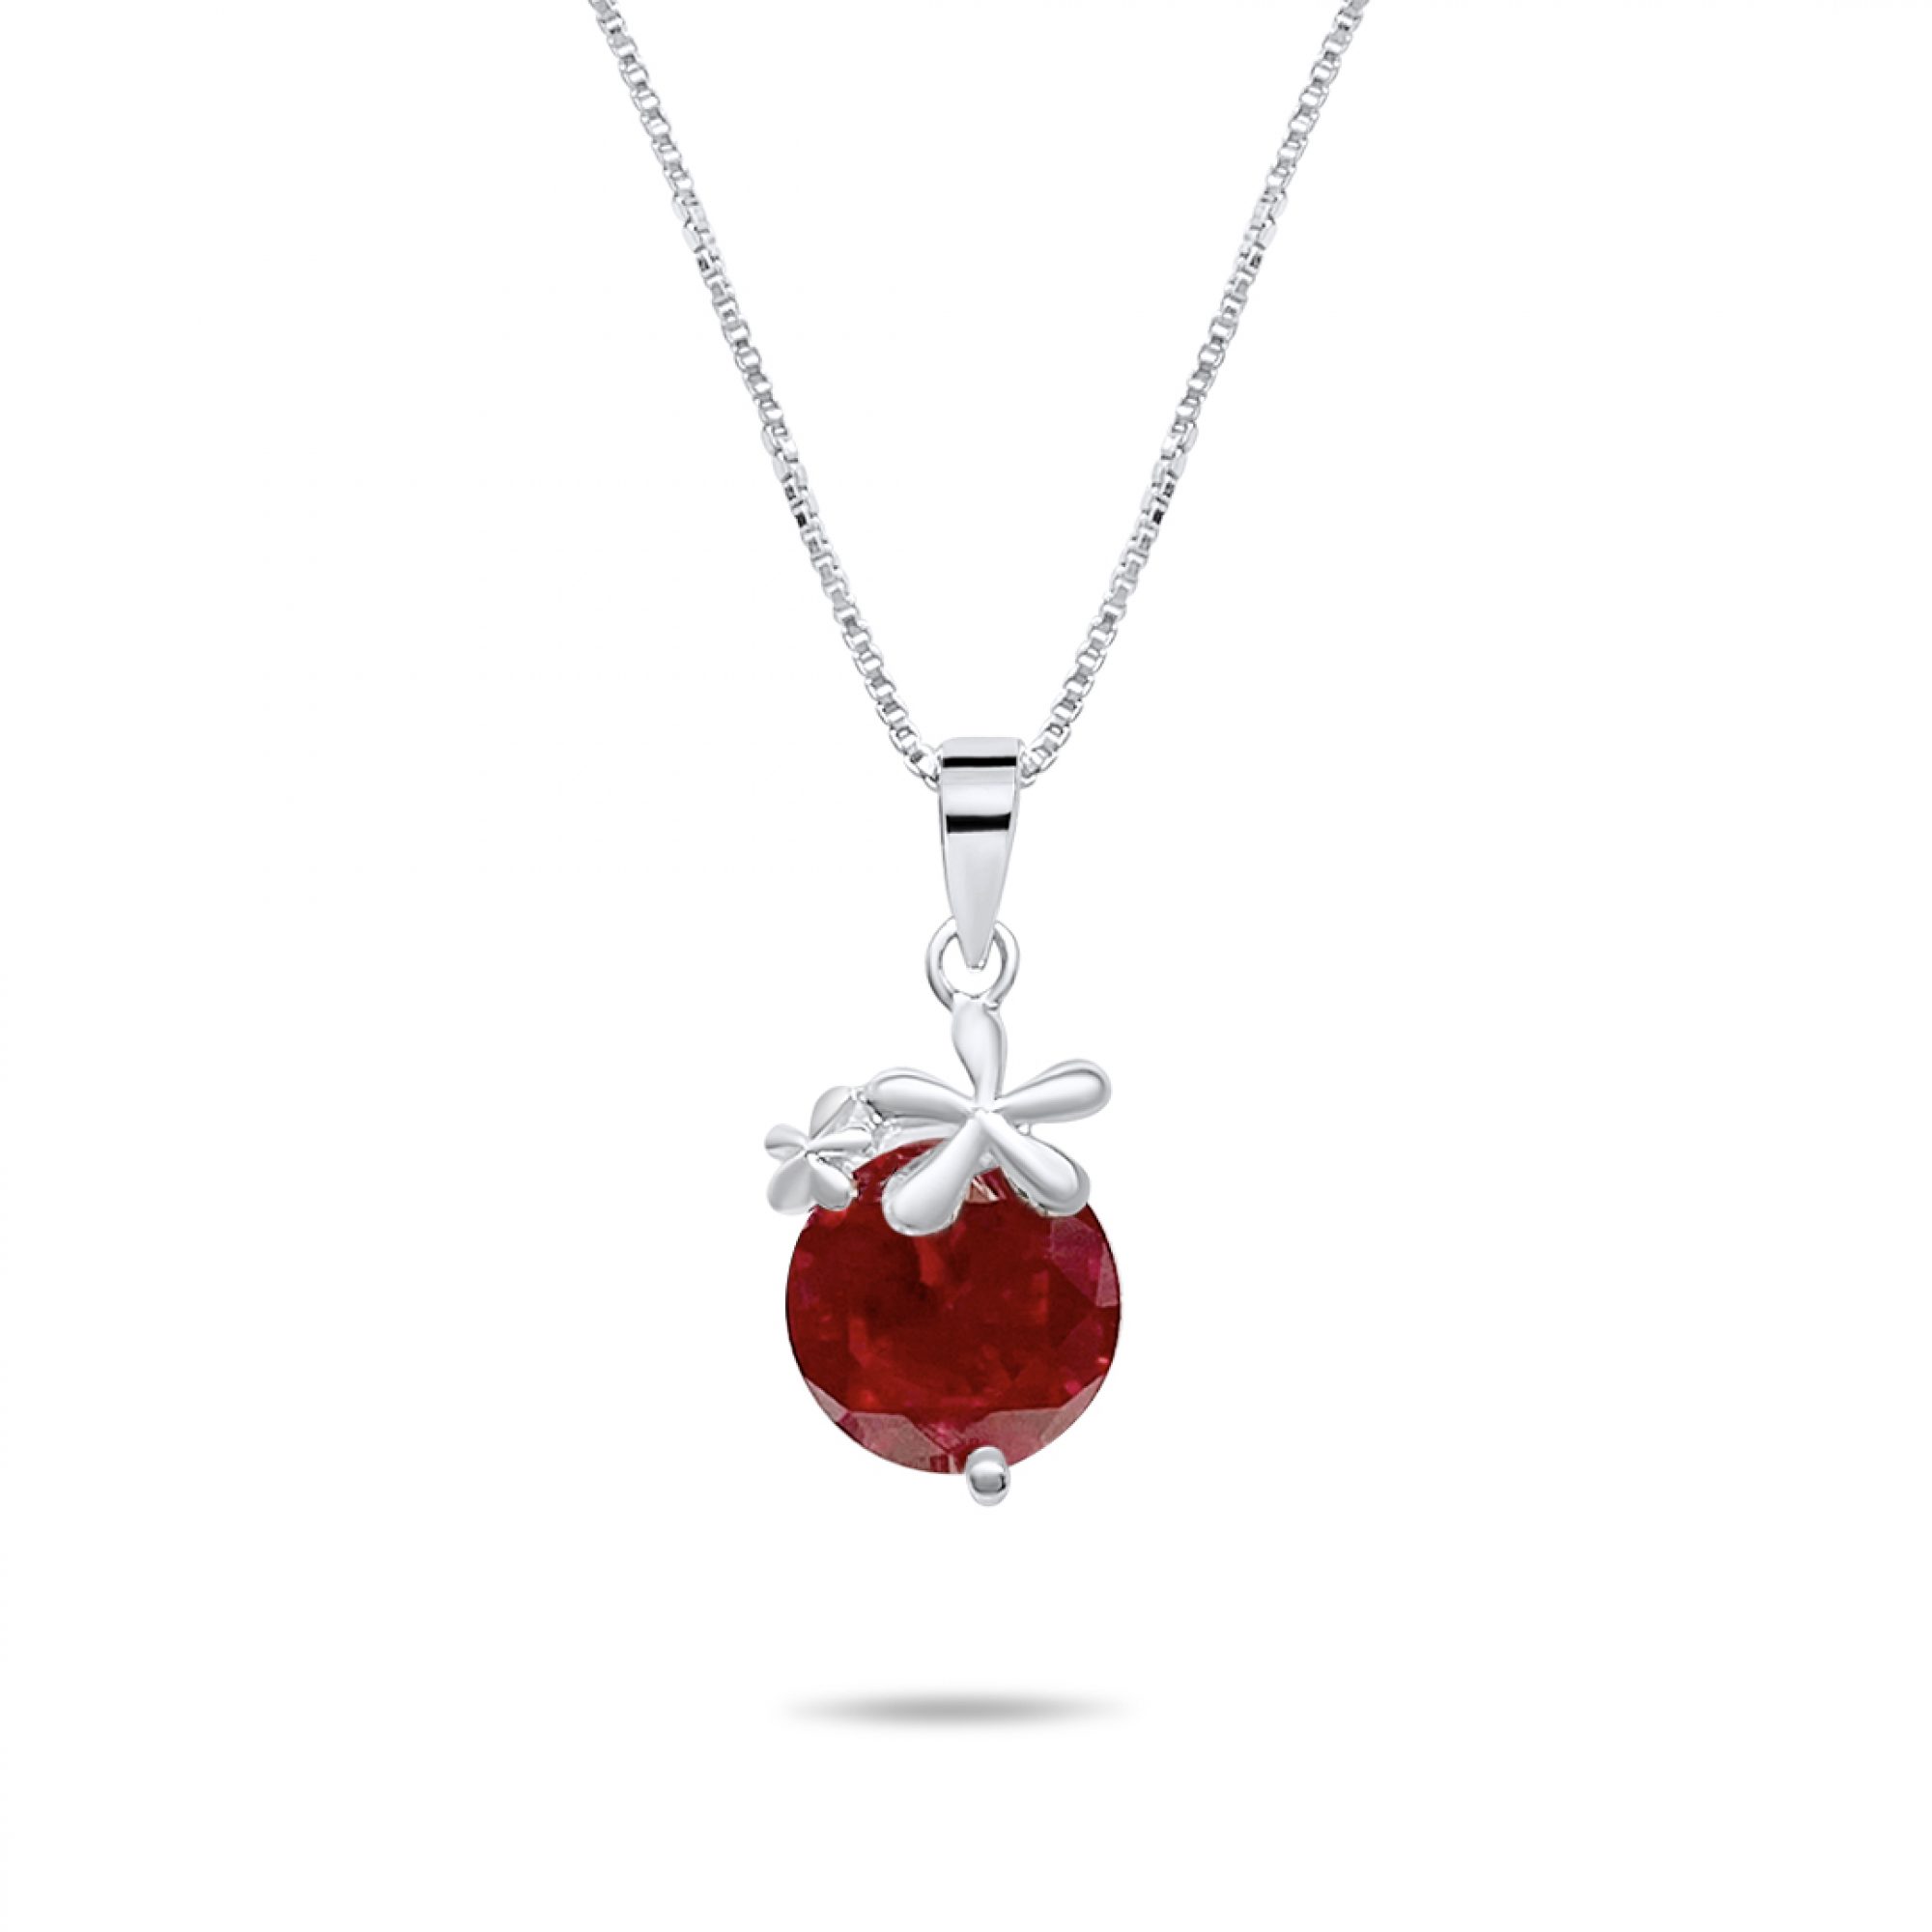 Necklace with ruby stone